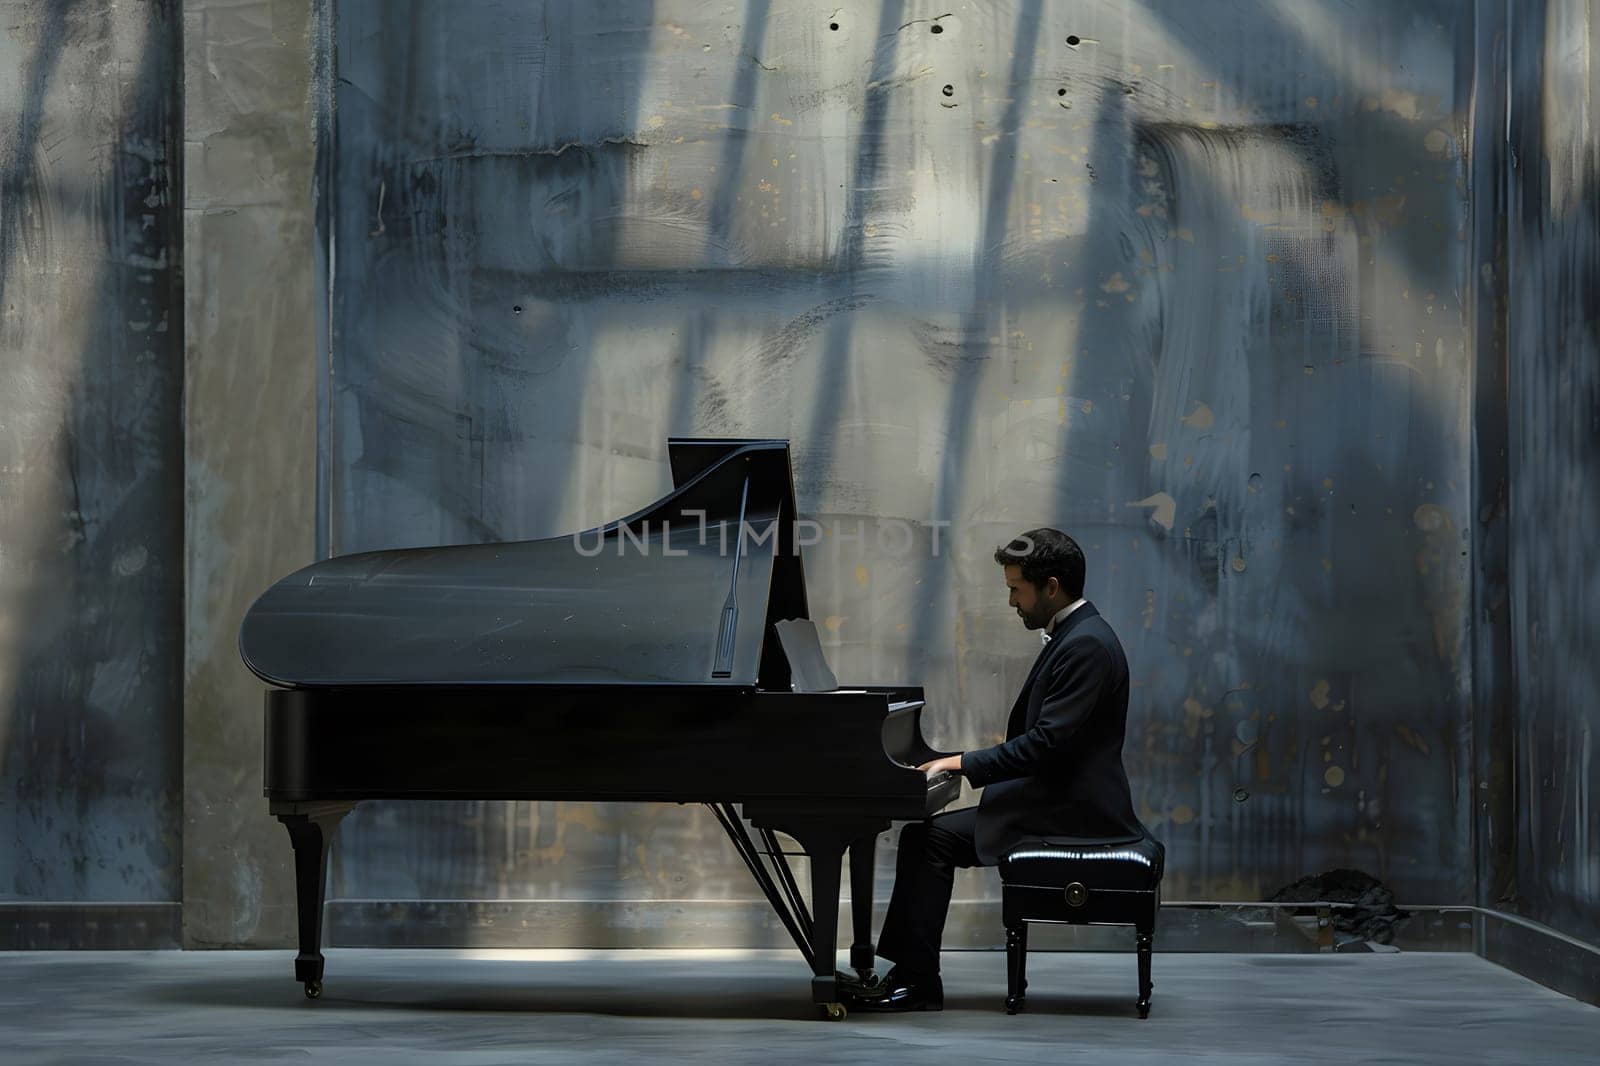 A pianist in a suit is performing on a piano in a dimly lit room, creating beautiful music for an intimate audience at a recital event